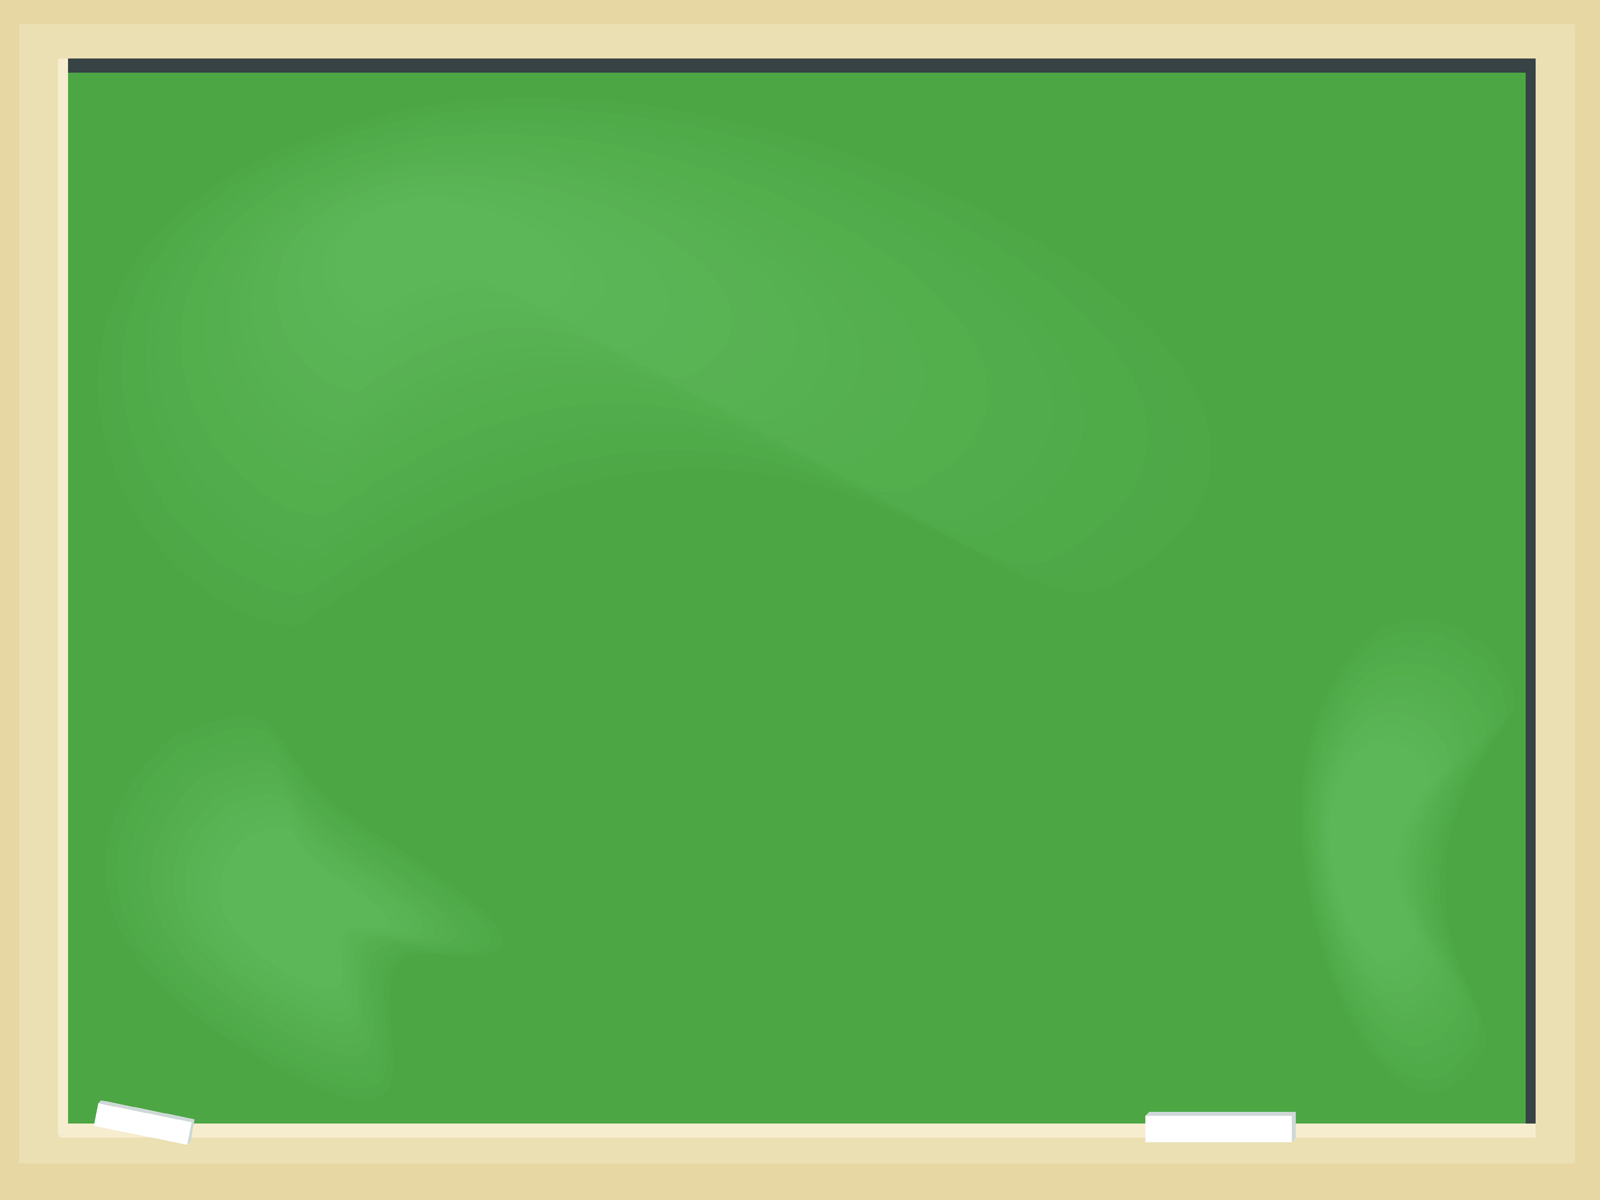 Sweet Blackboard for Education Backgrounds | Beige, Black, Educational,  Green, White Templates | Free PPT Grounds